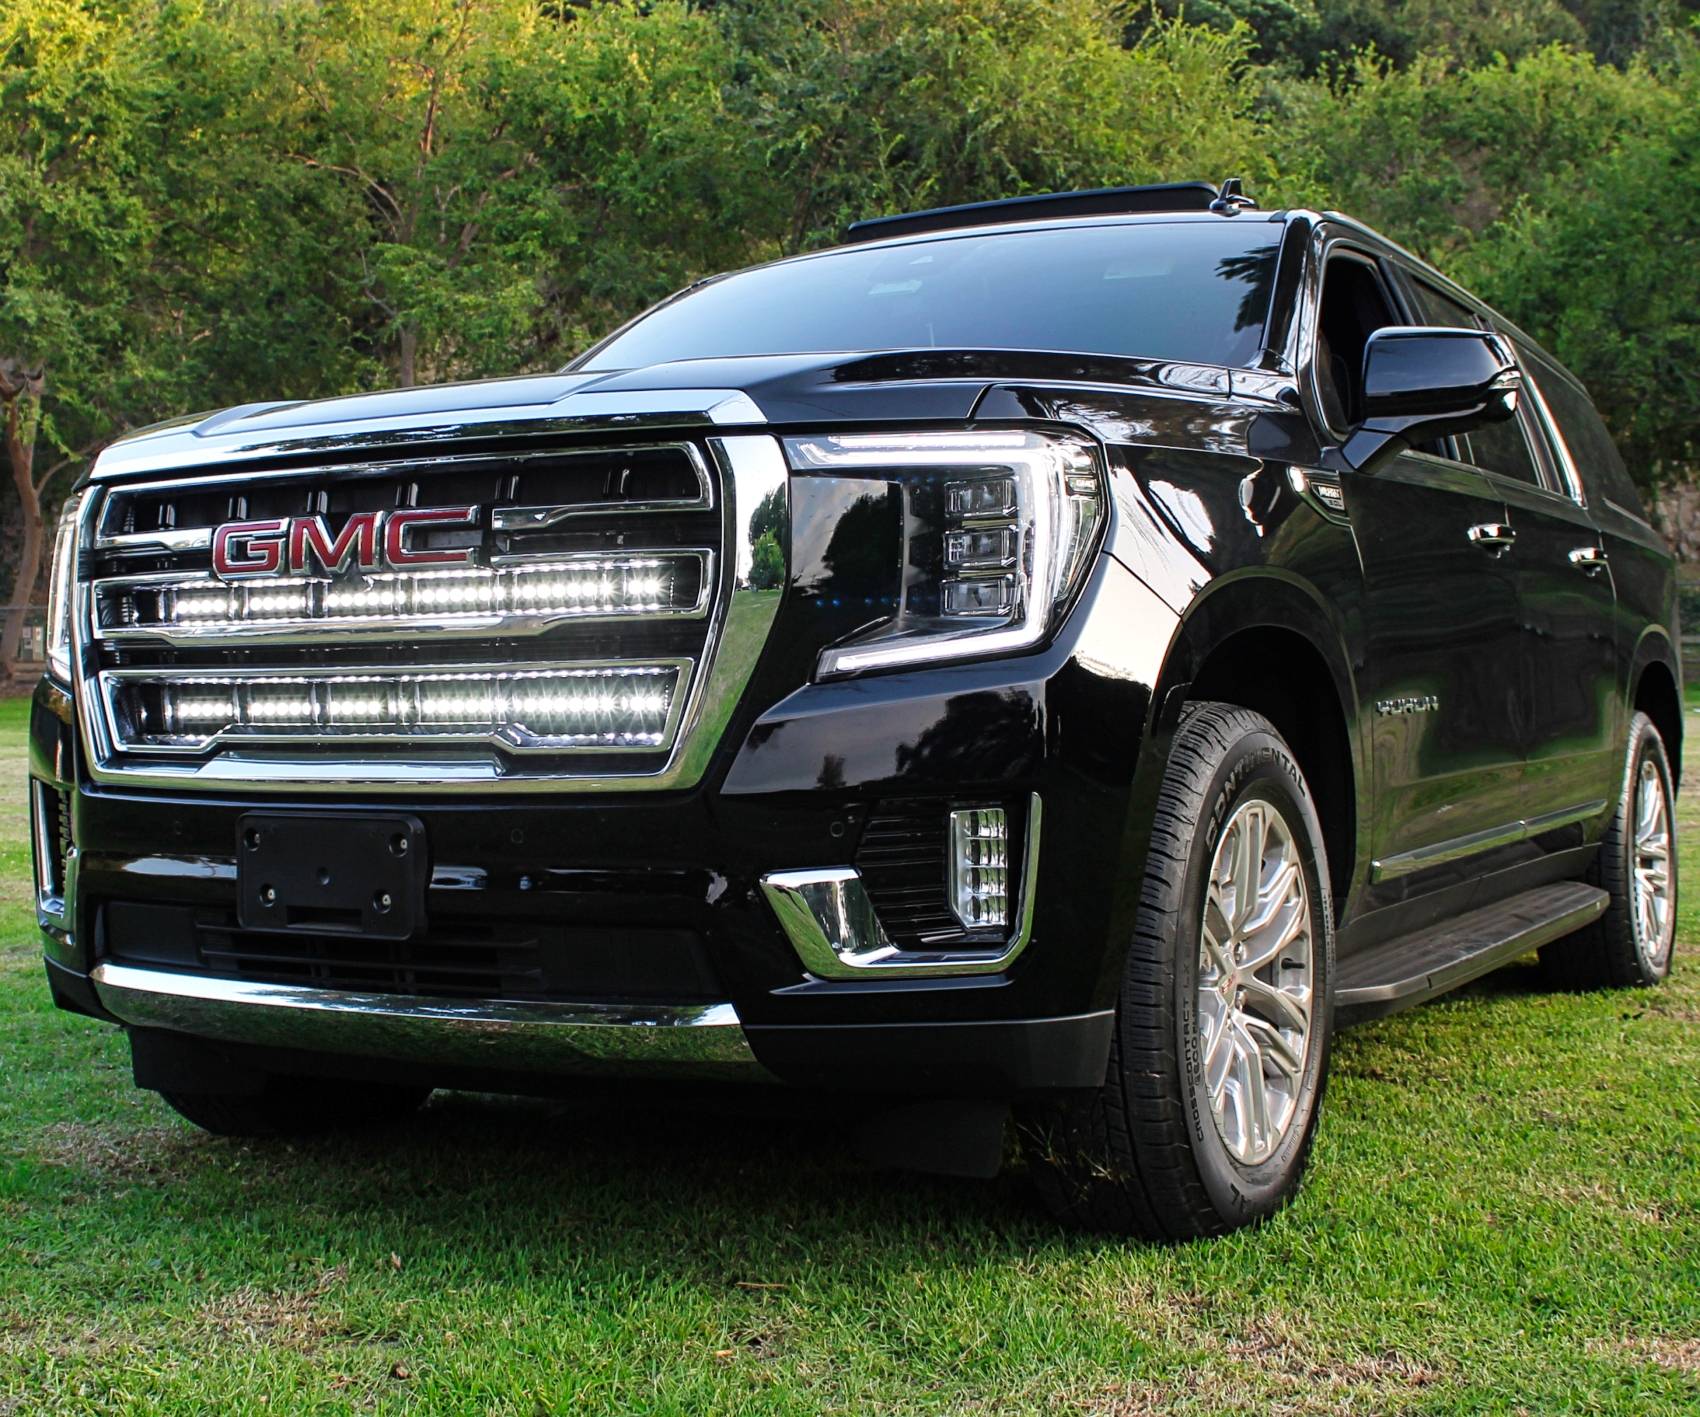 2023 gmc yukon light bars behind the grille by M&R automotive